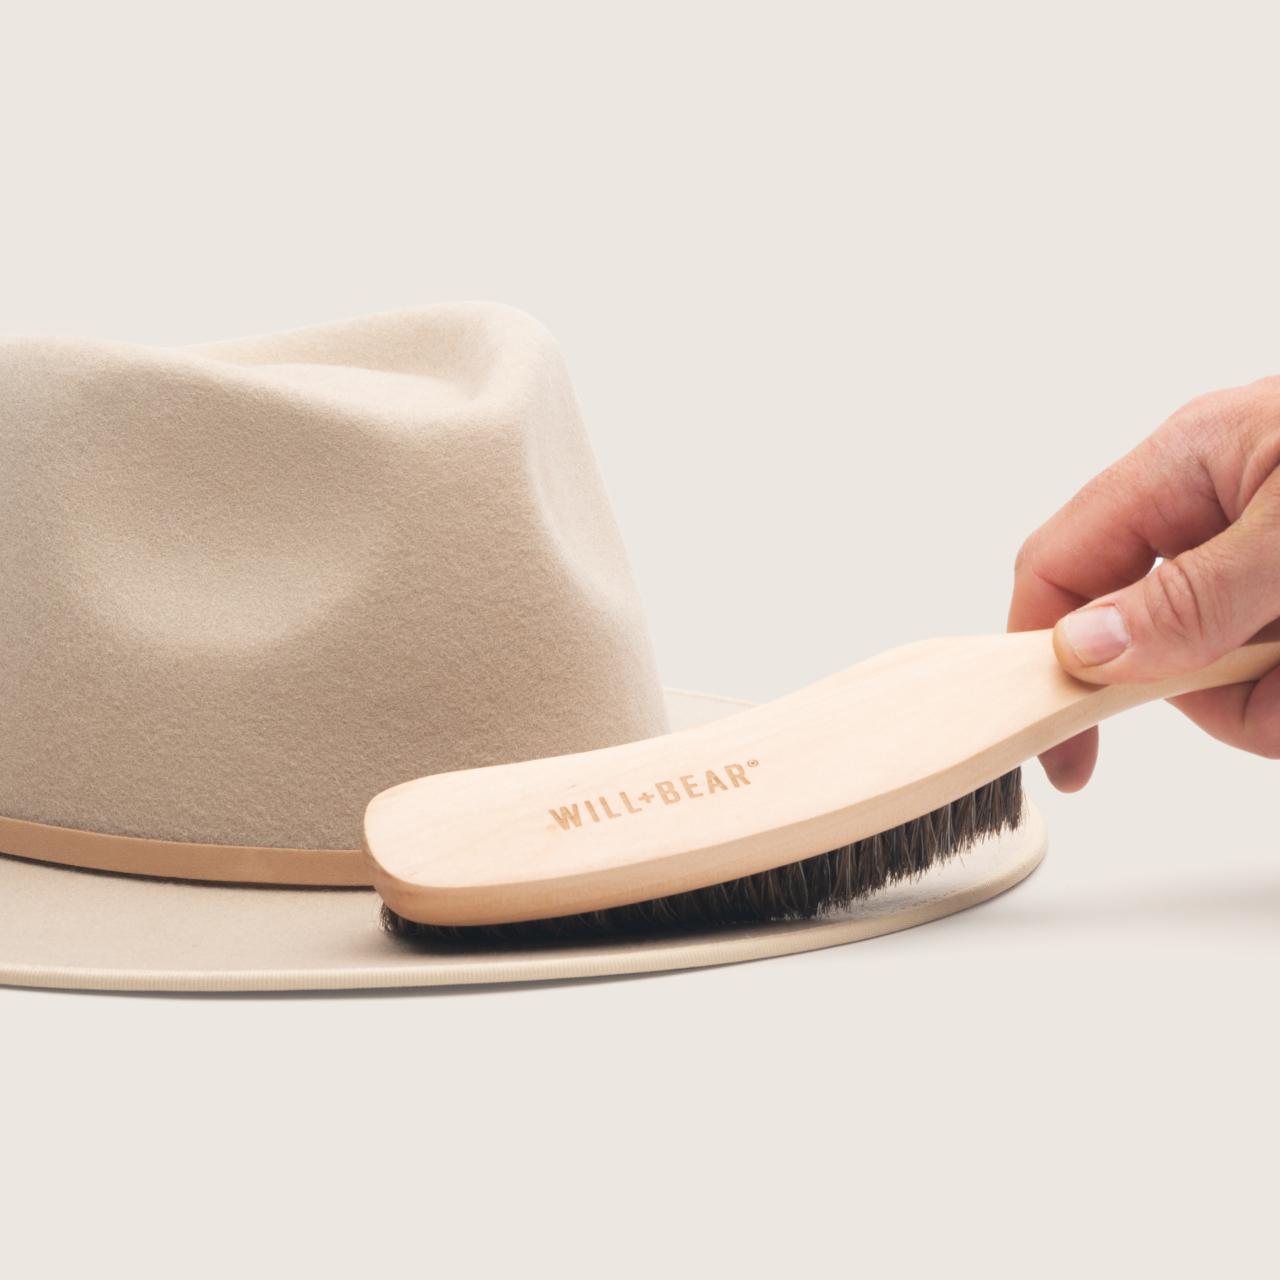 Felt hat is brushed with a soft bristle hat cleaning brush to remove dirt